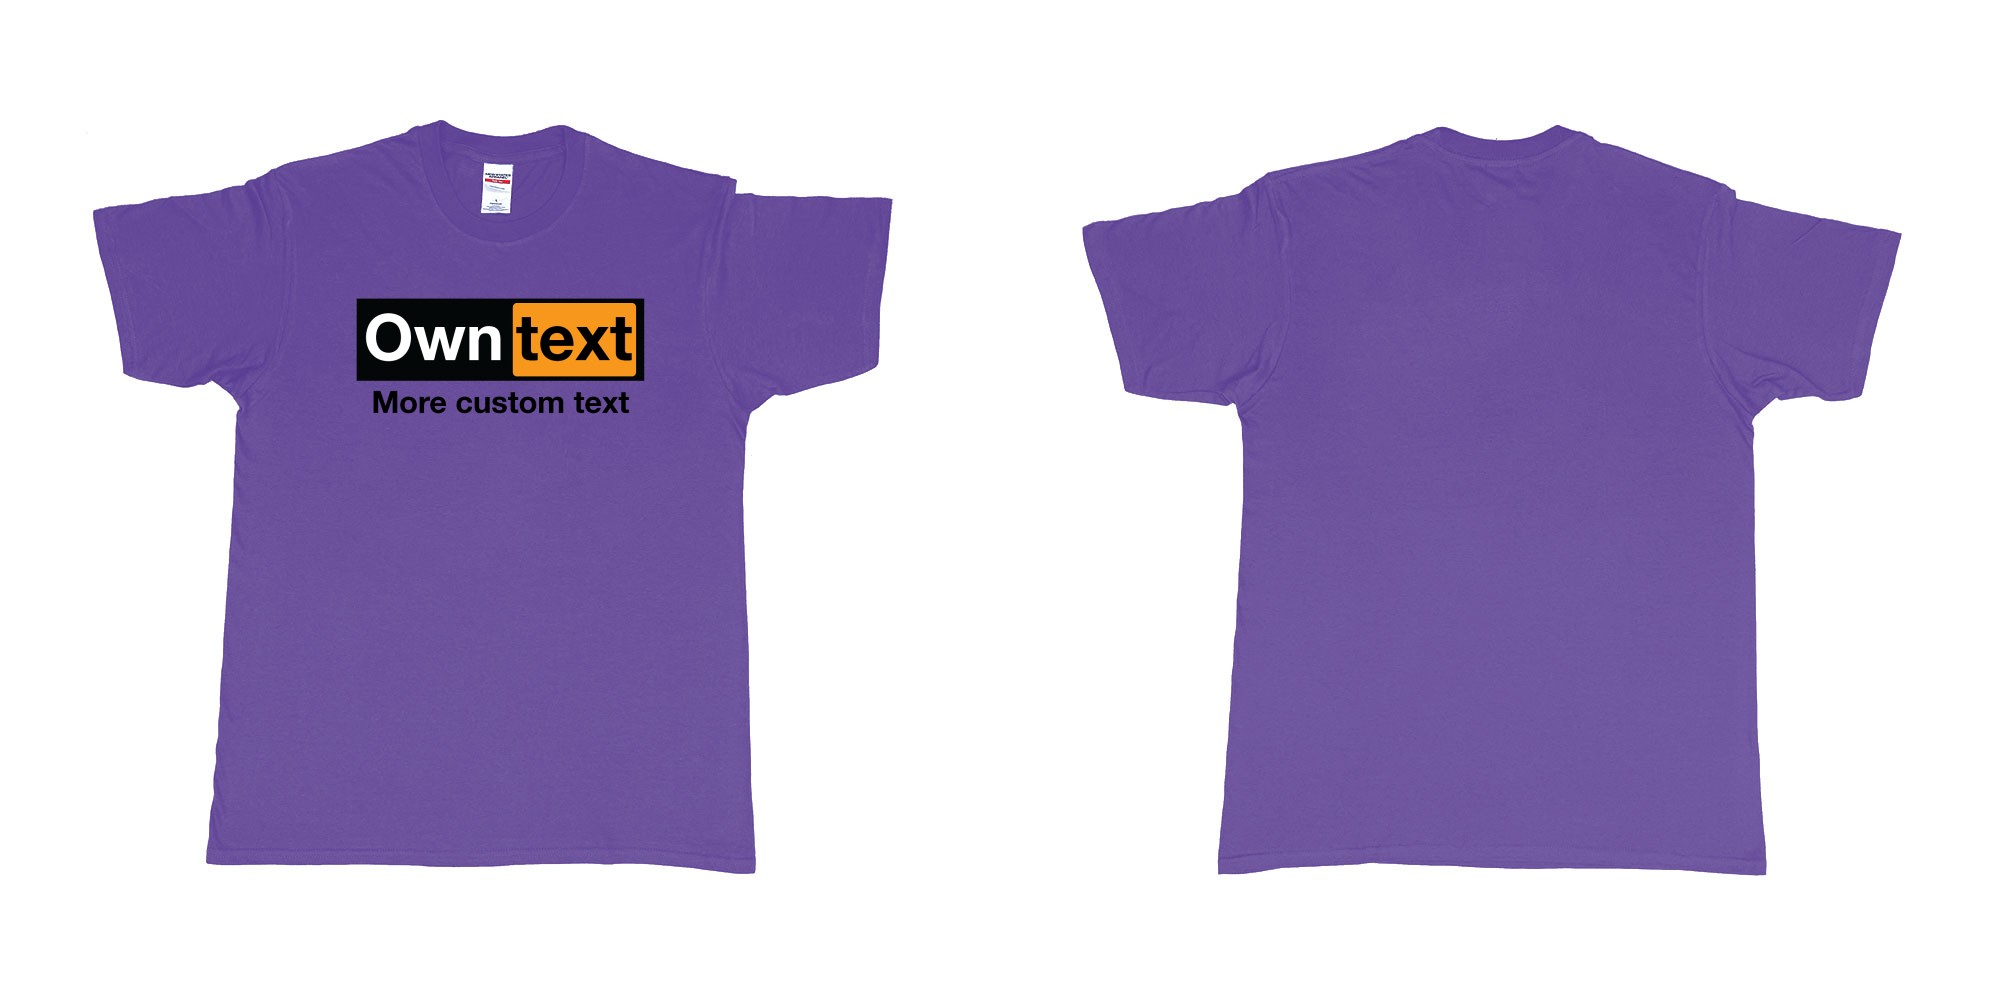 Custom tshirt design porn hub add custom text print tshirt in fabric color purple choice your own text made in Bali by The Pirate Way